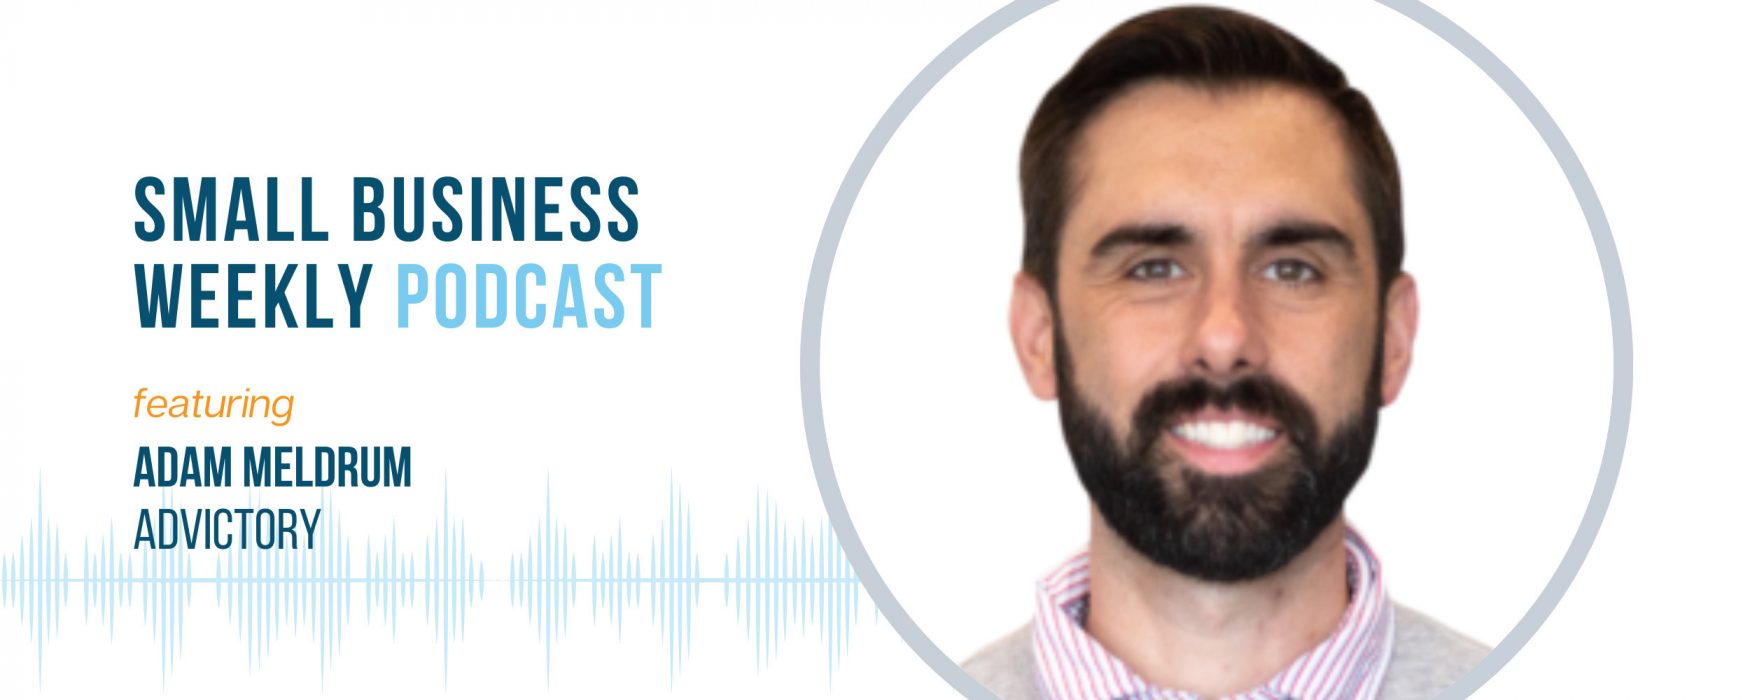 The Small Business Weekly podcast with Adam Meldrum of Advictory